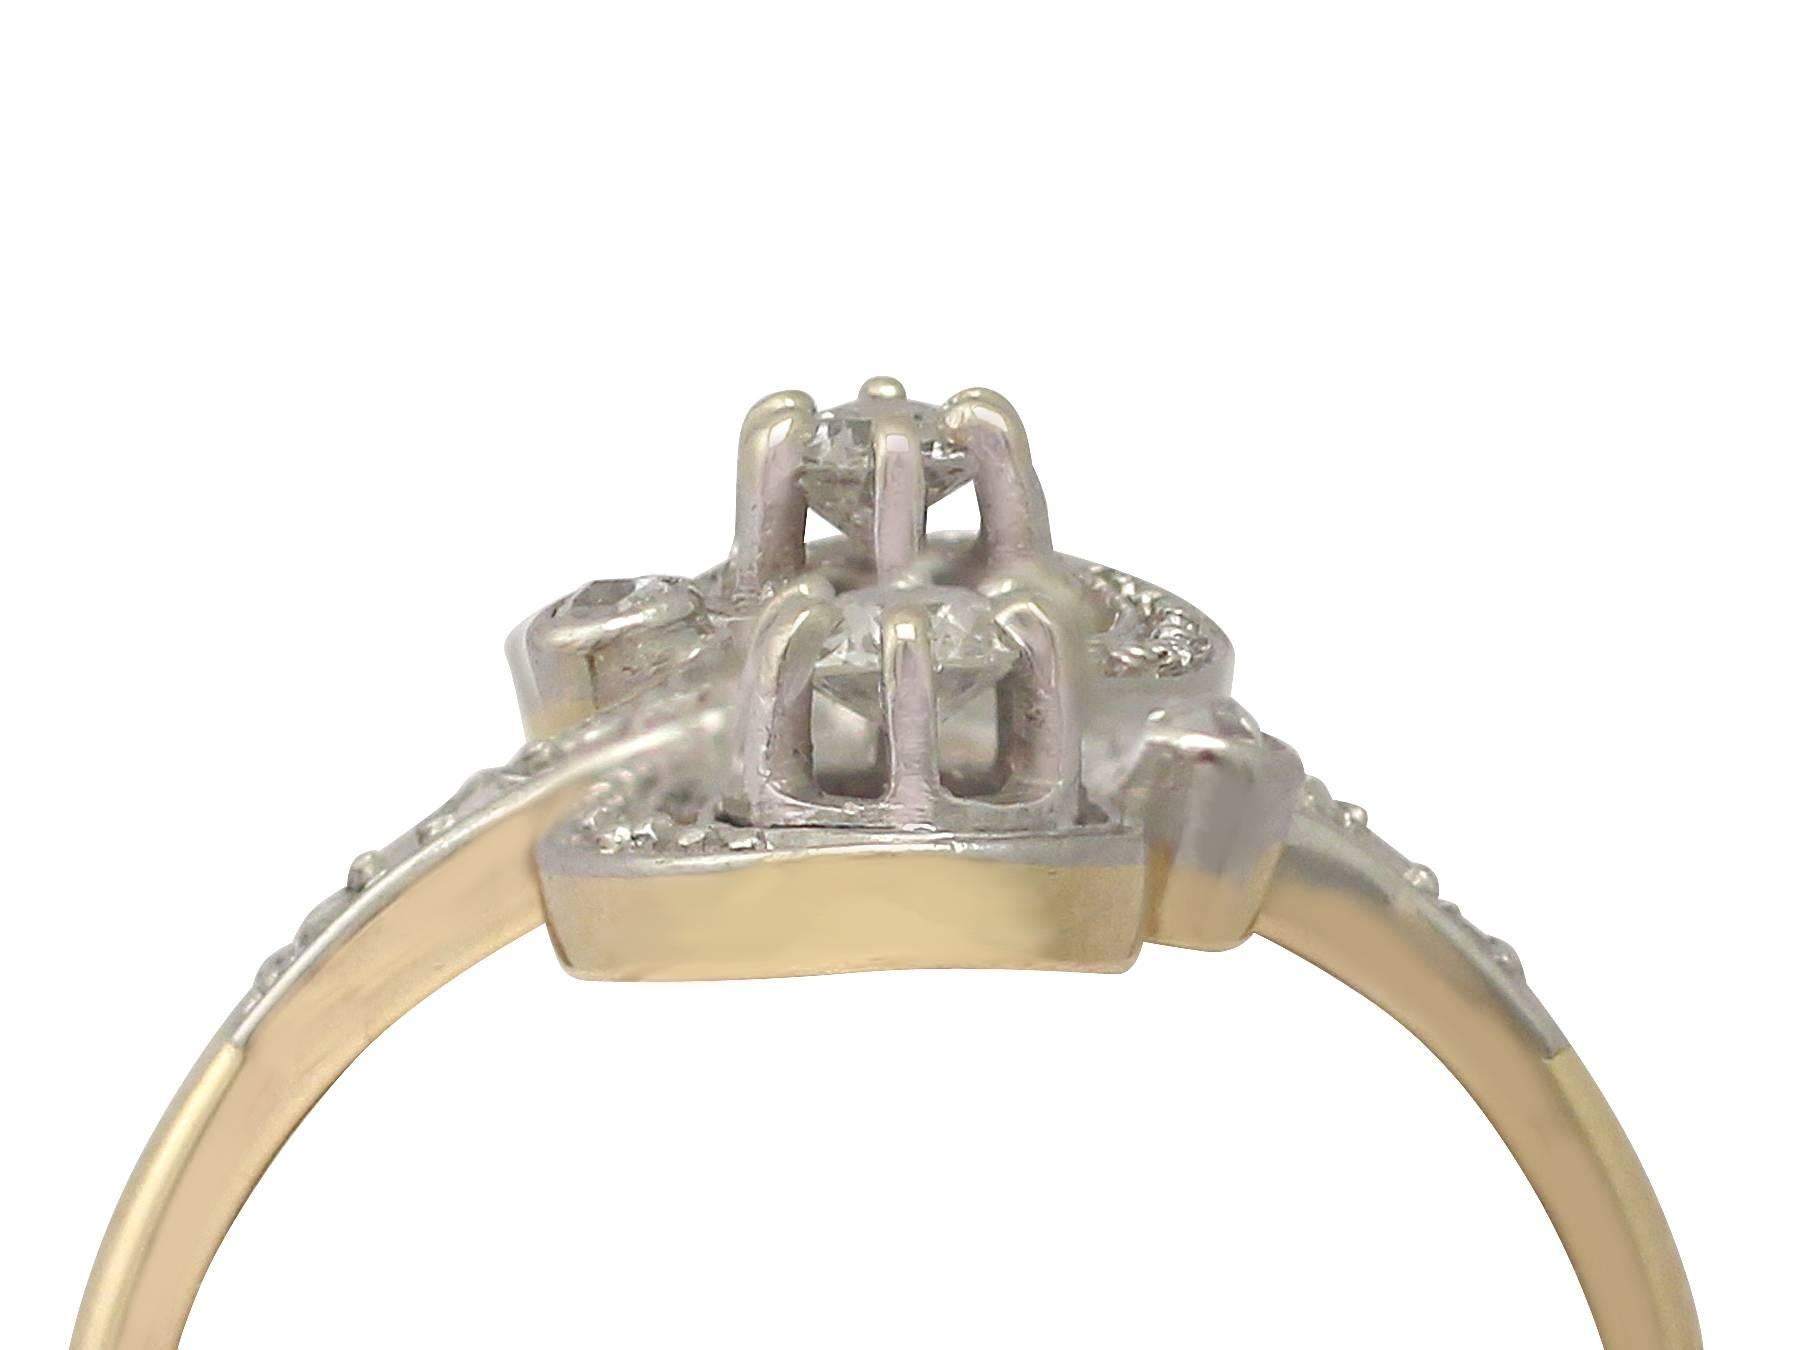 This fine and impressive antique diamond twist ring has been crafted in 18k yellow gold with an 18k white gold setting.

The pierced decorated claw settings display two Old European round cut diamonds claw set vertically on a twist.

The feature